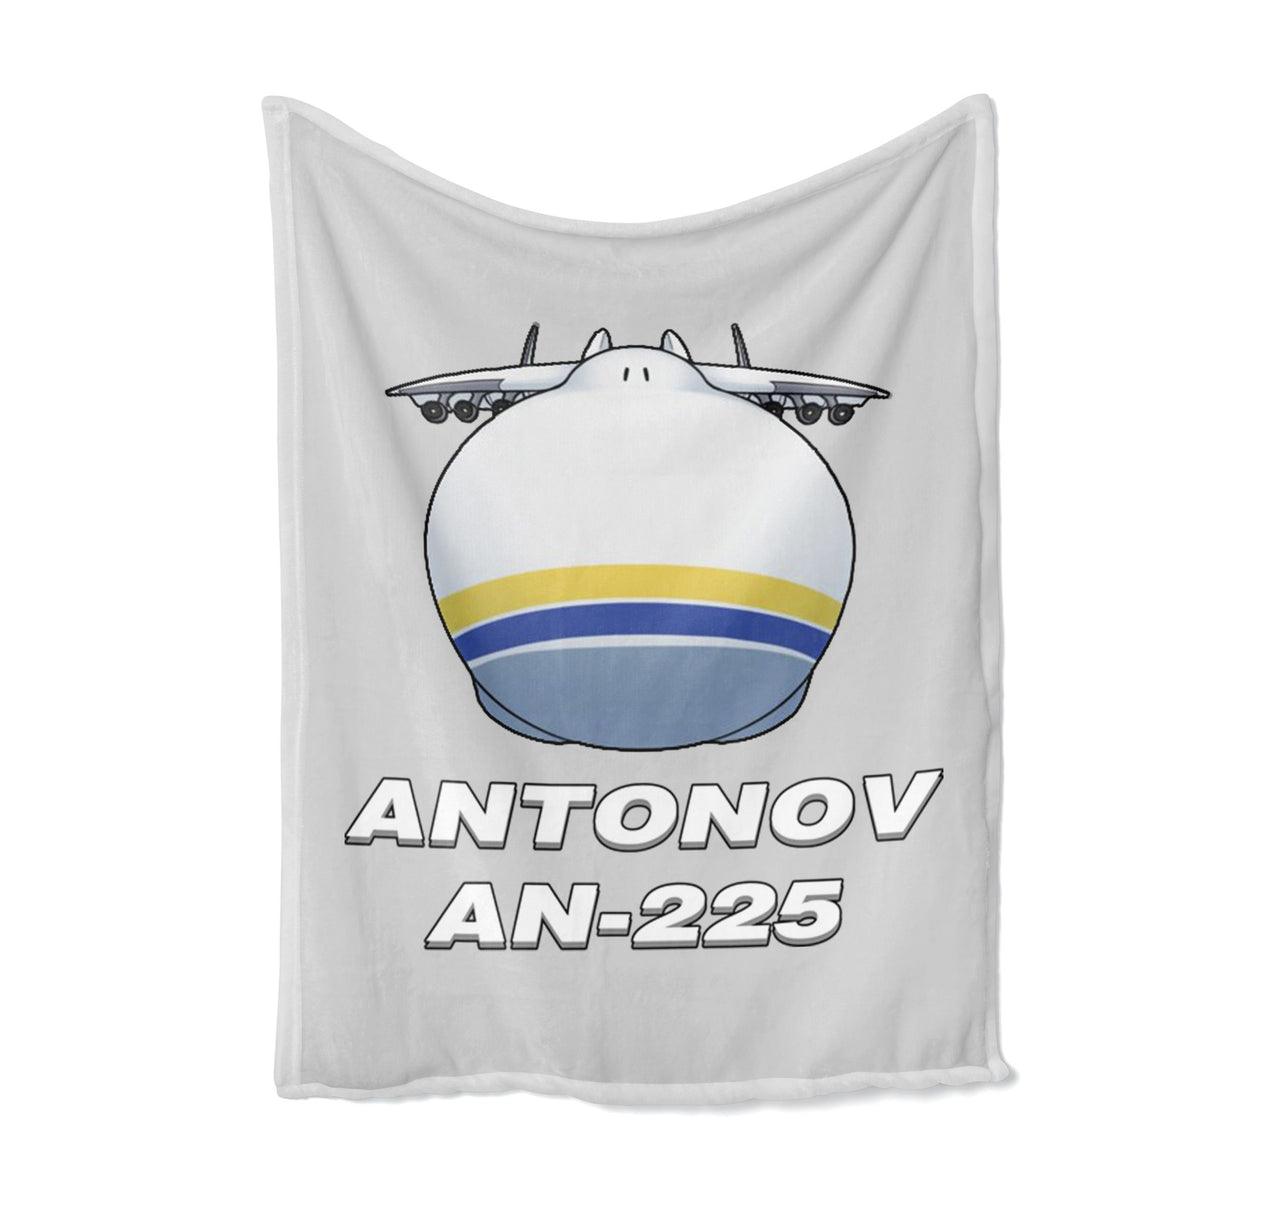 Antonov AN-225 (20) Designed Bed Blankets & Covers